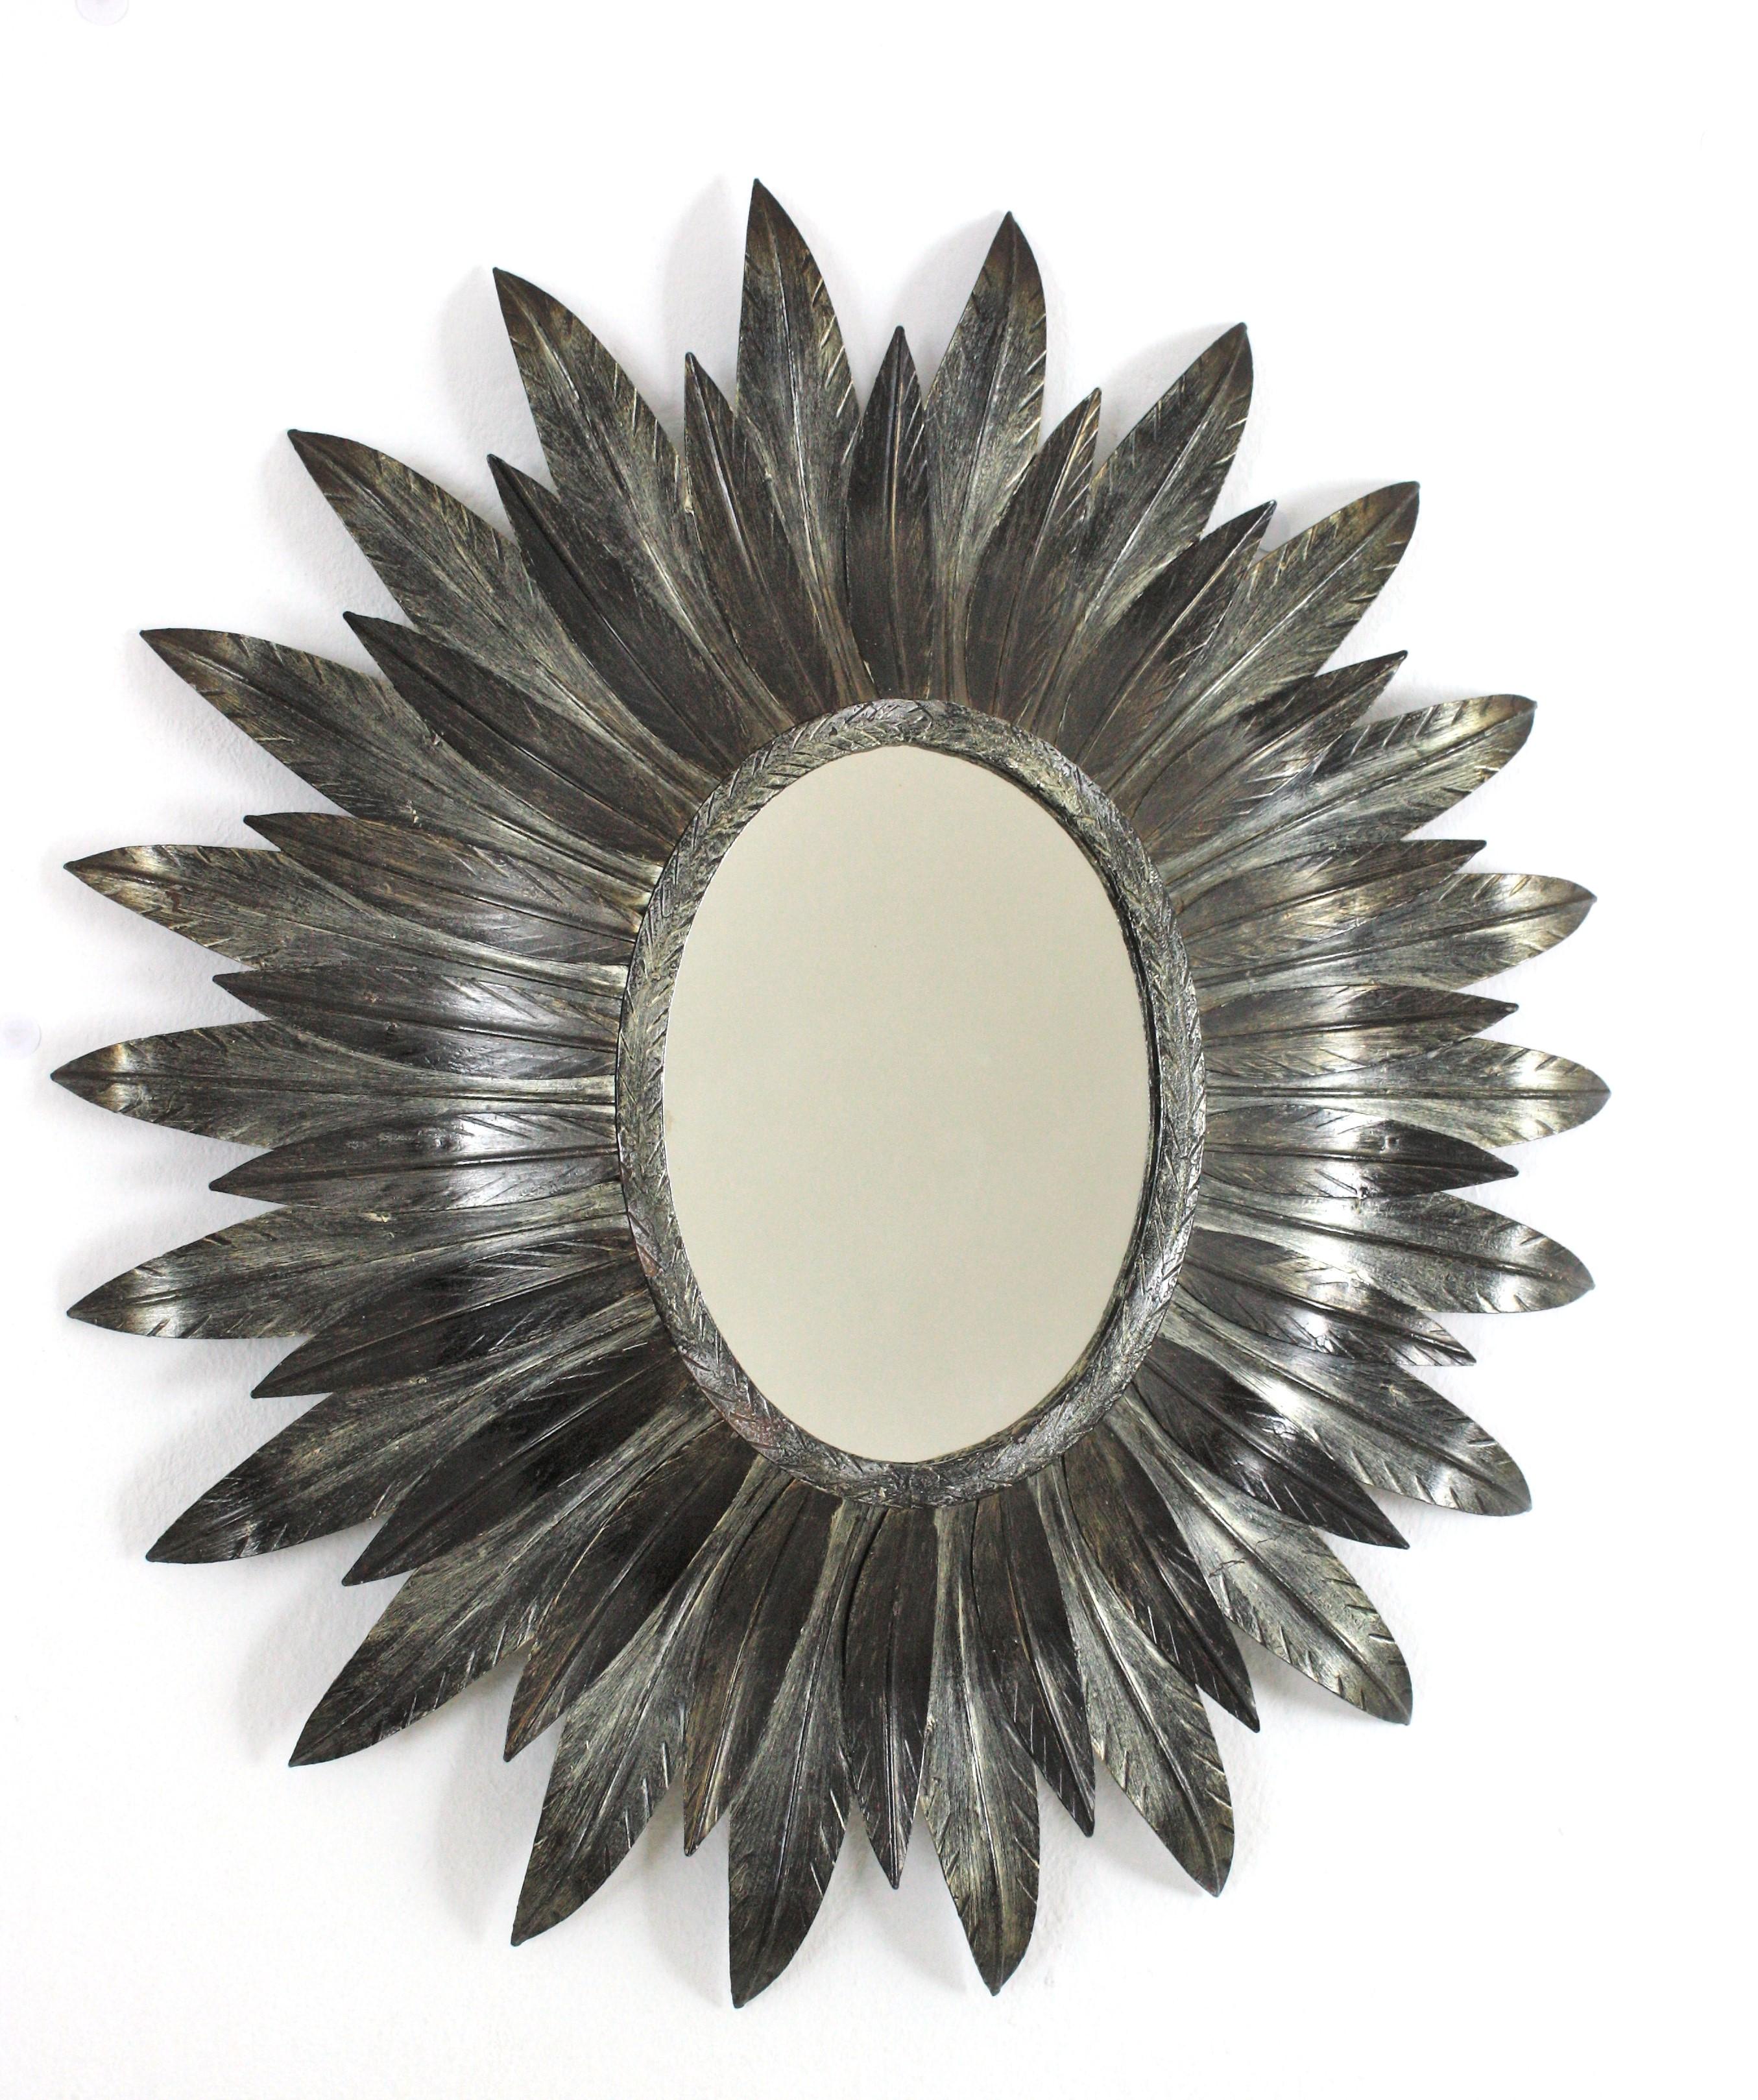 Eyecatching Oval Shaped Sunburst Mirror in Silvered Gilt Metal Spain, 1950-1960.
This wall sunburst mirror features an oval glass framed with curved silvered metal leaves in two sizes.
Beautifully handcrafted. It has a nice aged patina.
This mirror